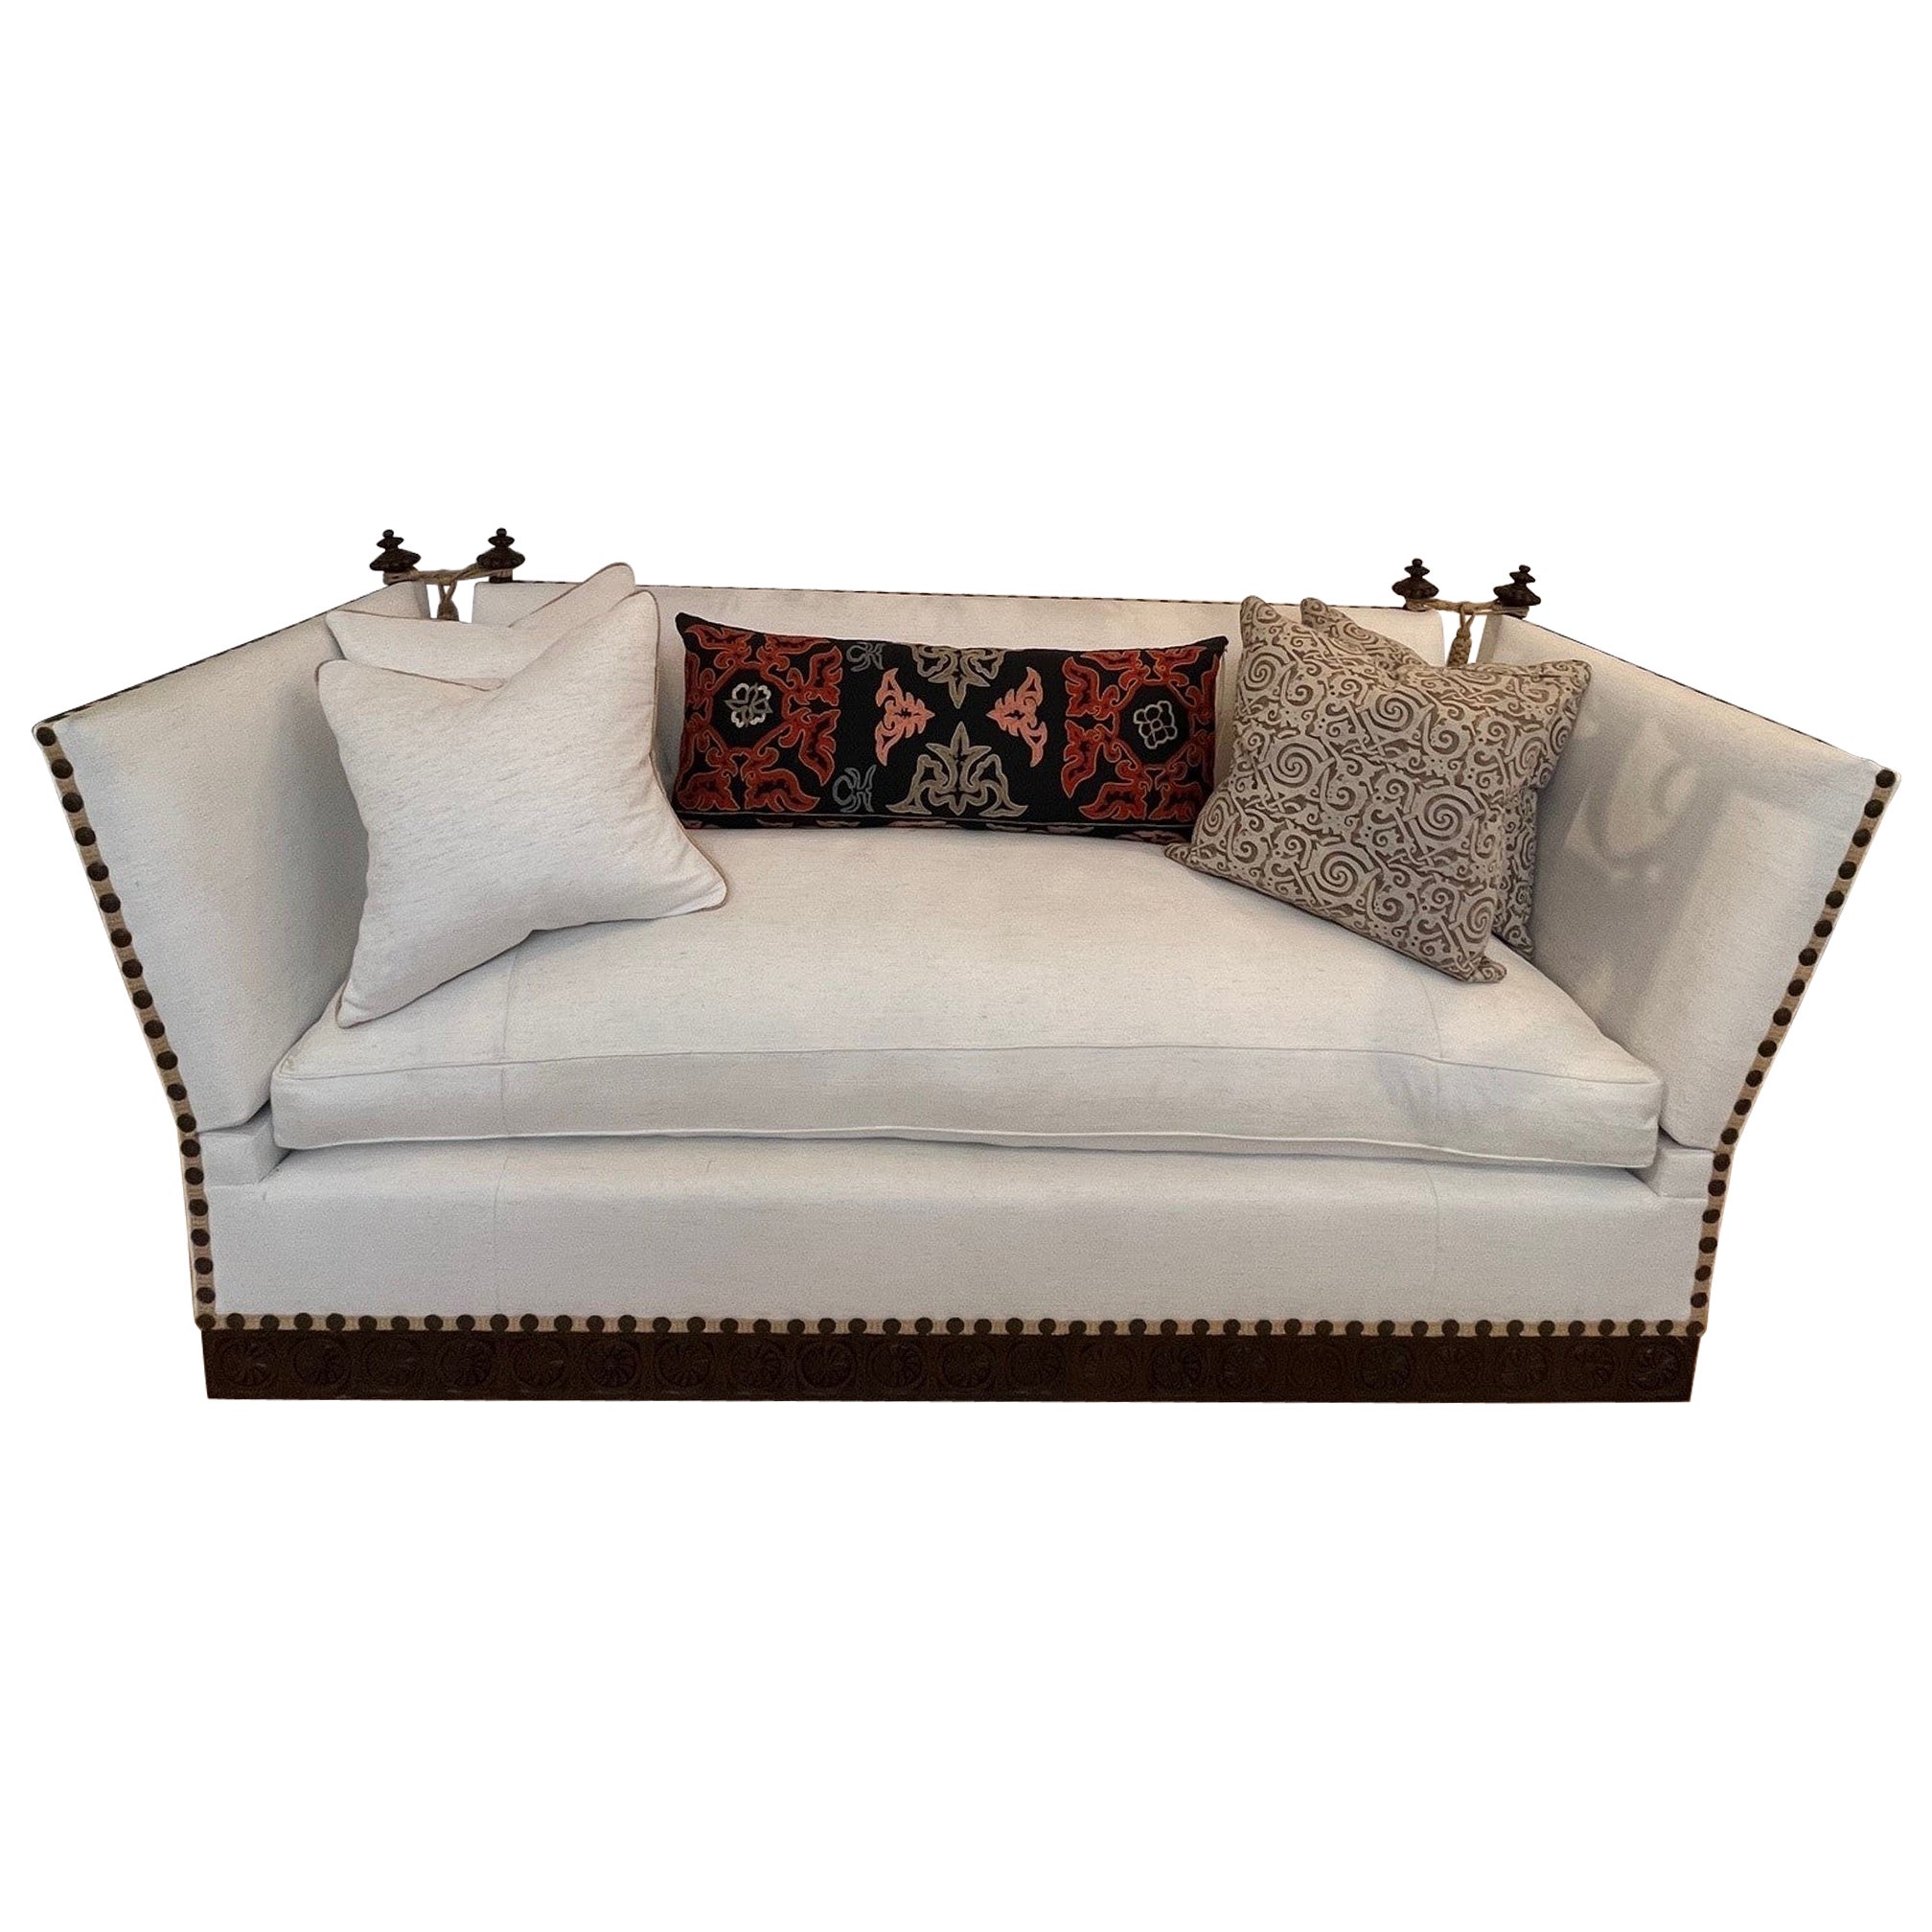 Made to Order Classic Drop Arm Knole Sofa with Carved Solid Walnut Base 